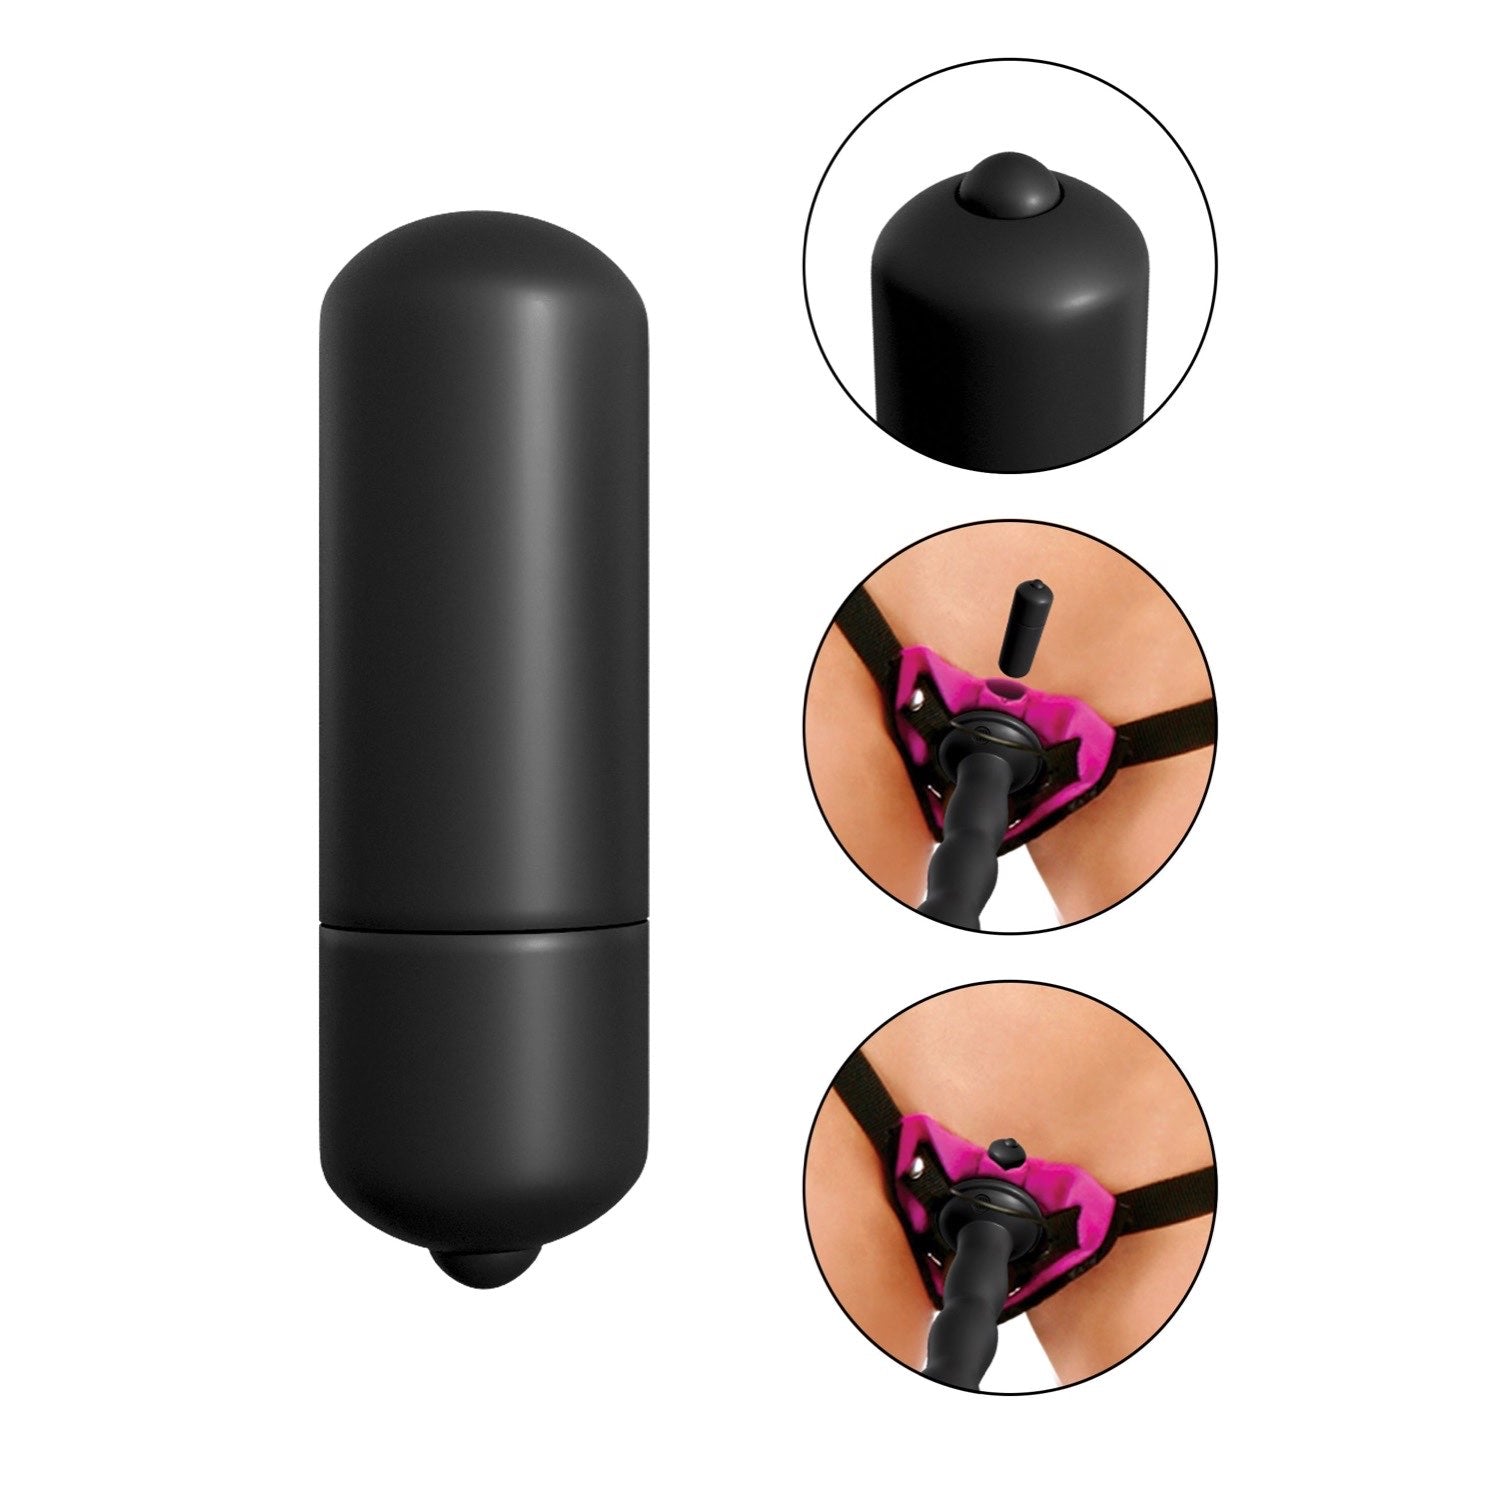  Vibrating Strap-on Set - Black/Pink 7&quot; Vibrating Strap-On by Pipedream